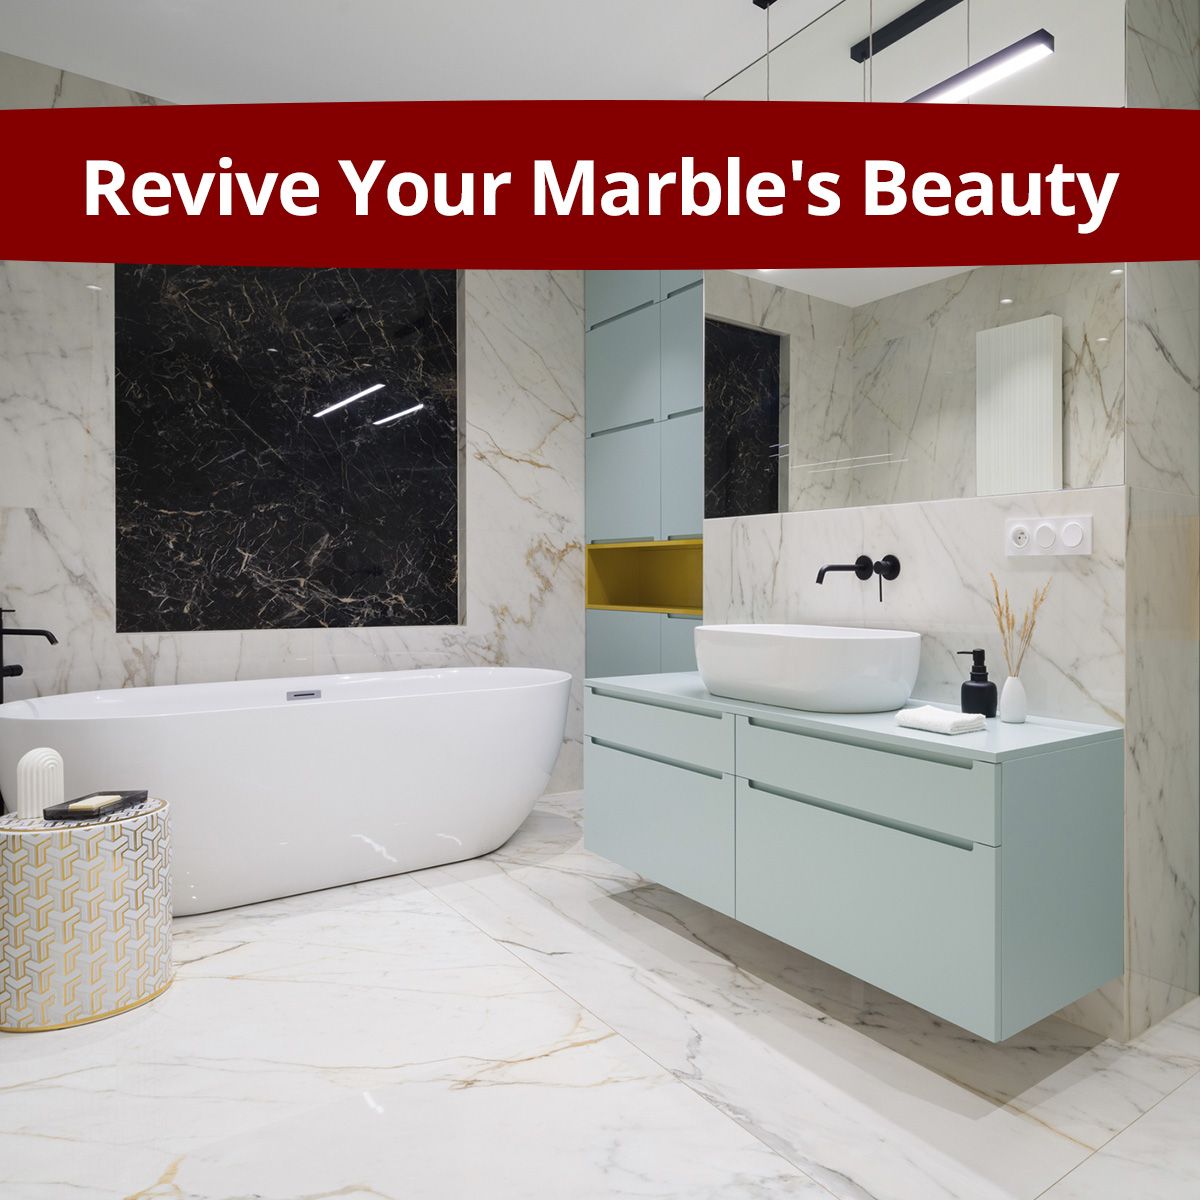 Revive Your Marble's Beauty